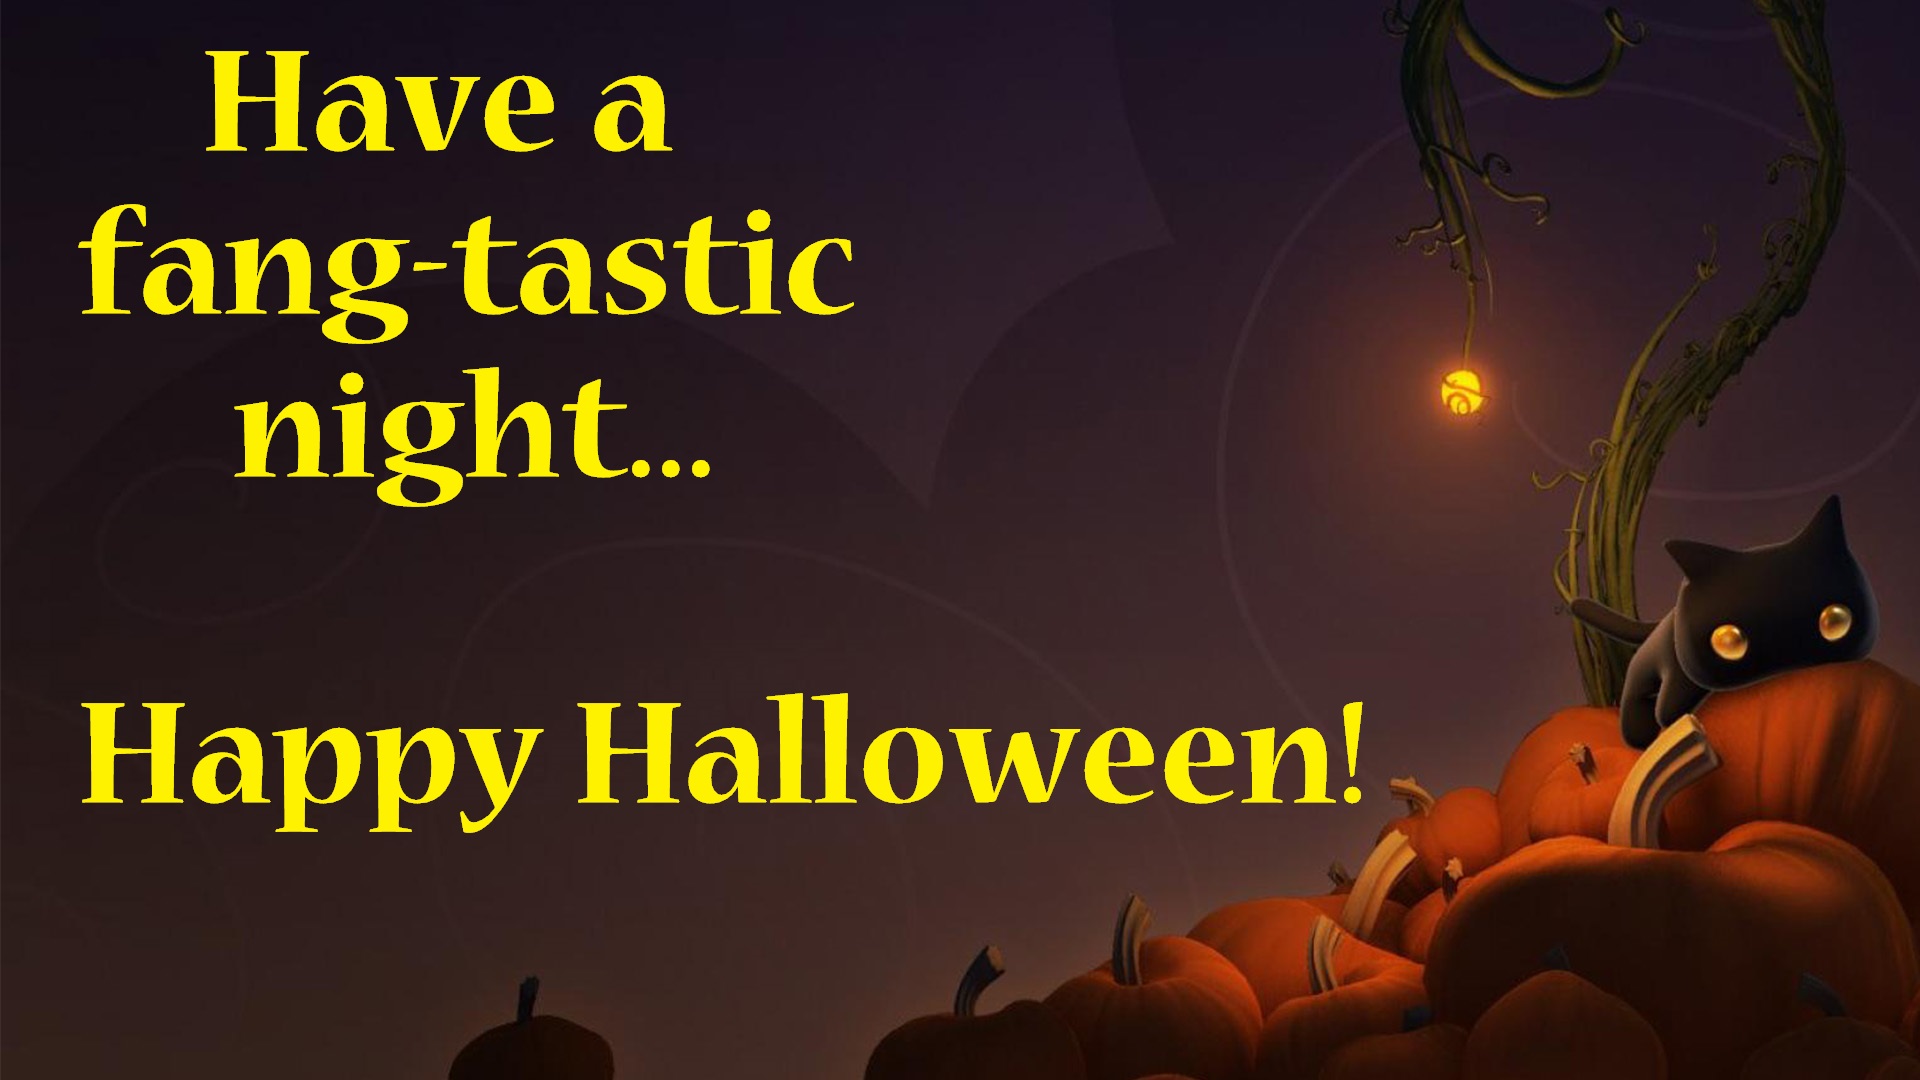 image for happy halloween wishes 2017